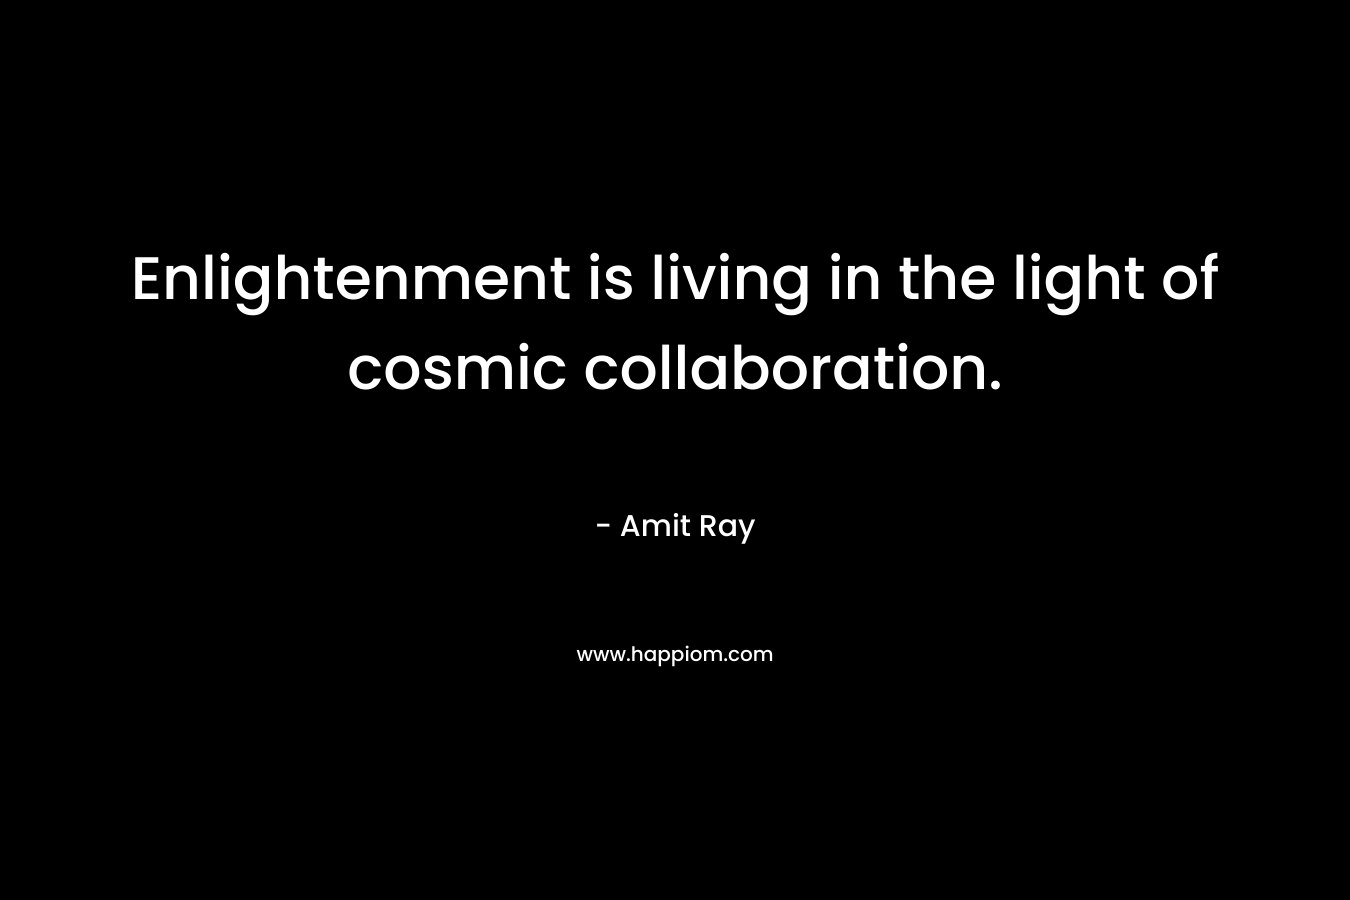 Enlightenment is living in the light of cosmic collaboration.